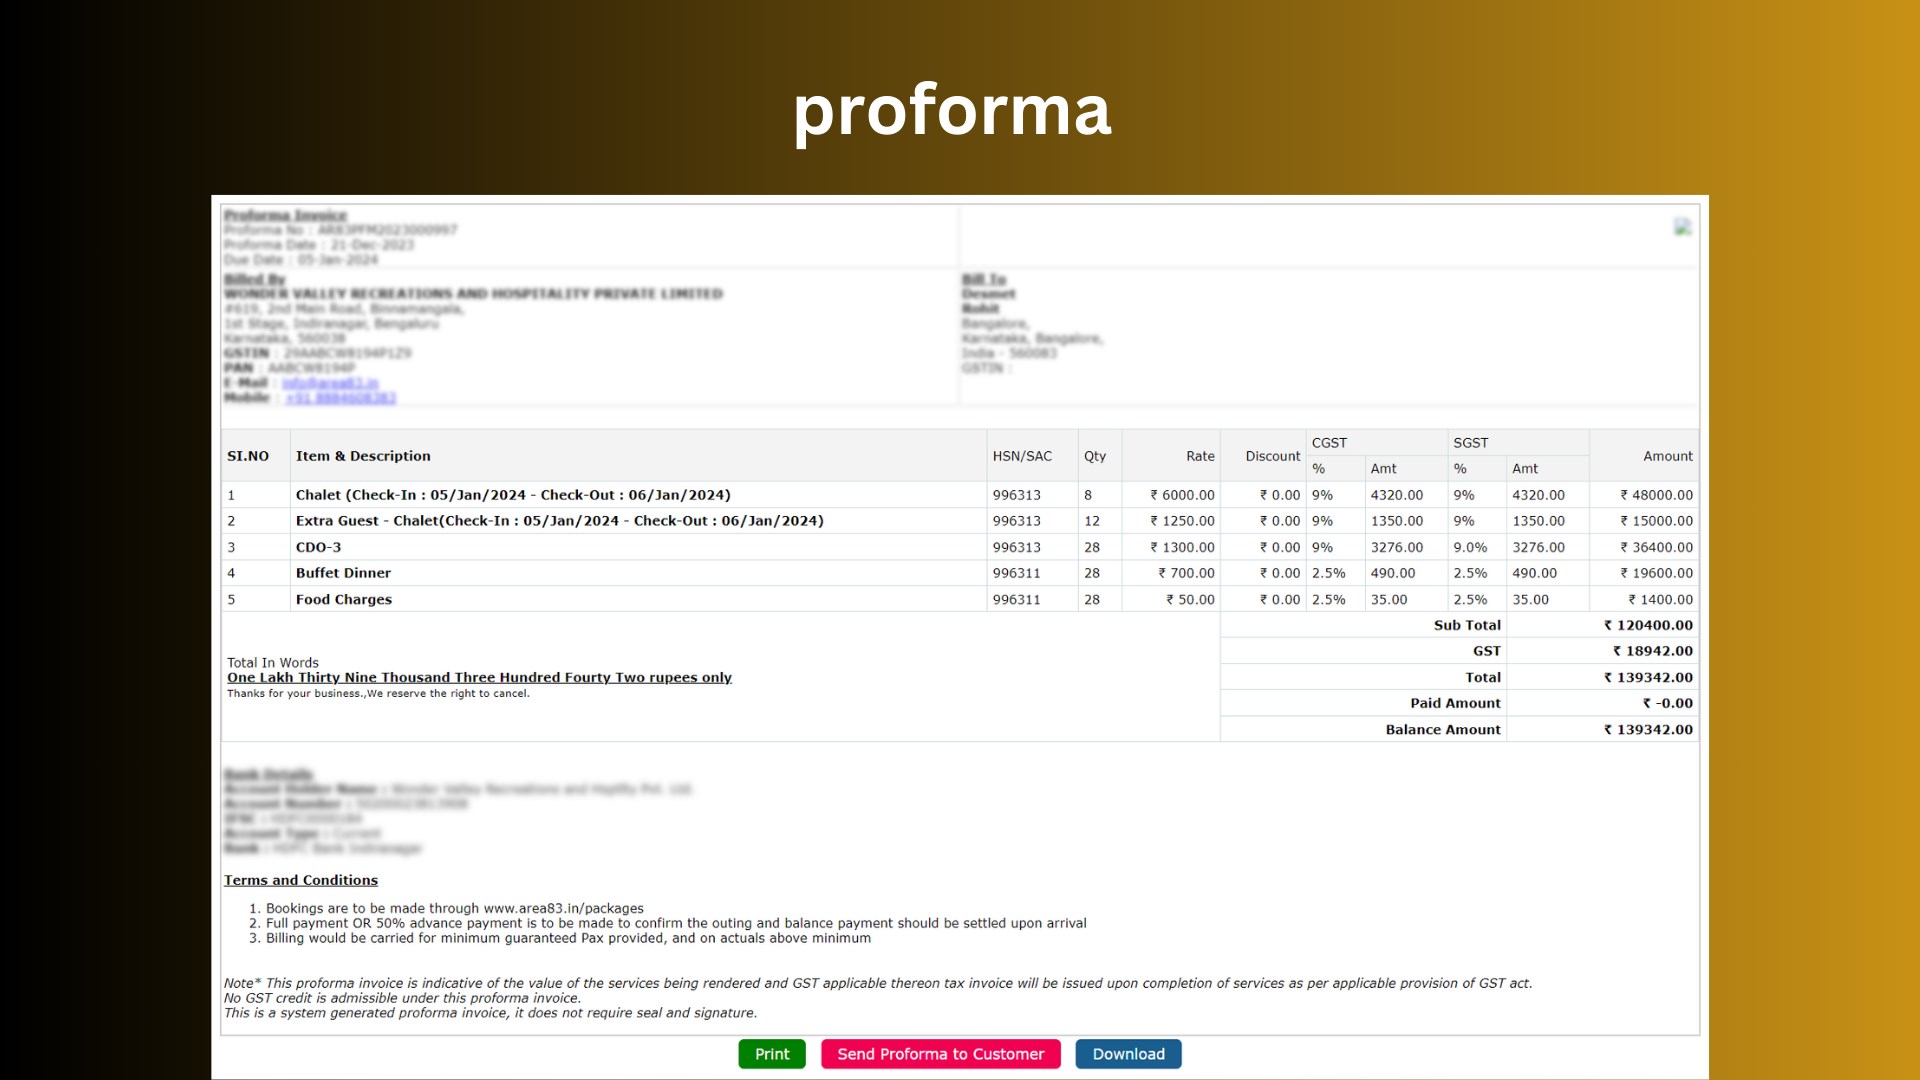 Implemented a feature that generates proforma invoices for each booking, facilitating seamless transaction processing and documentation of users.